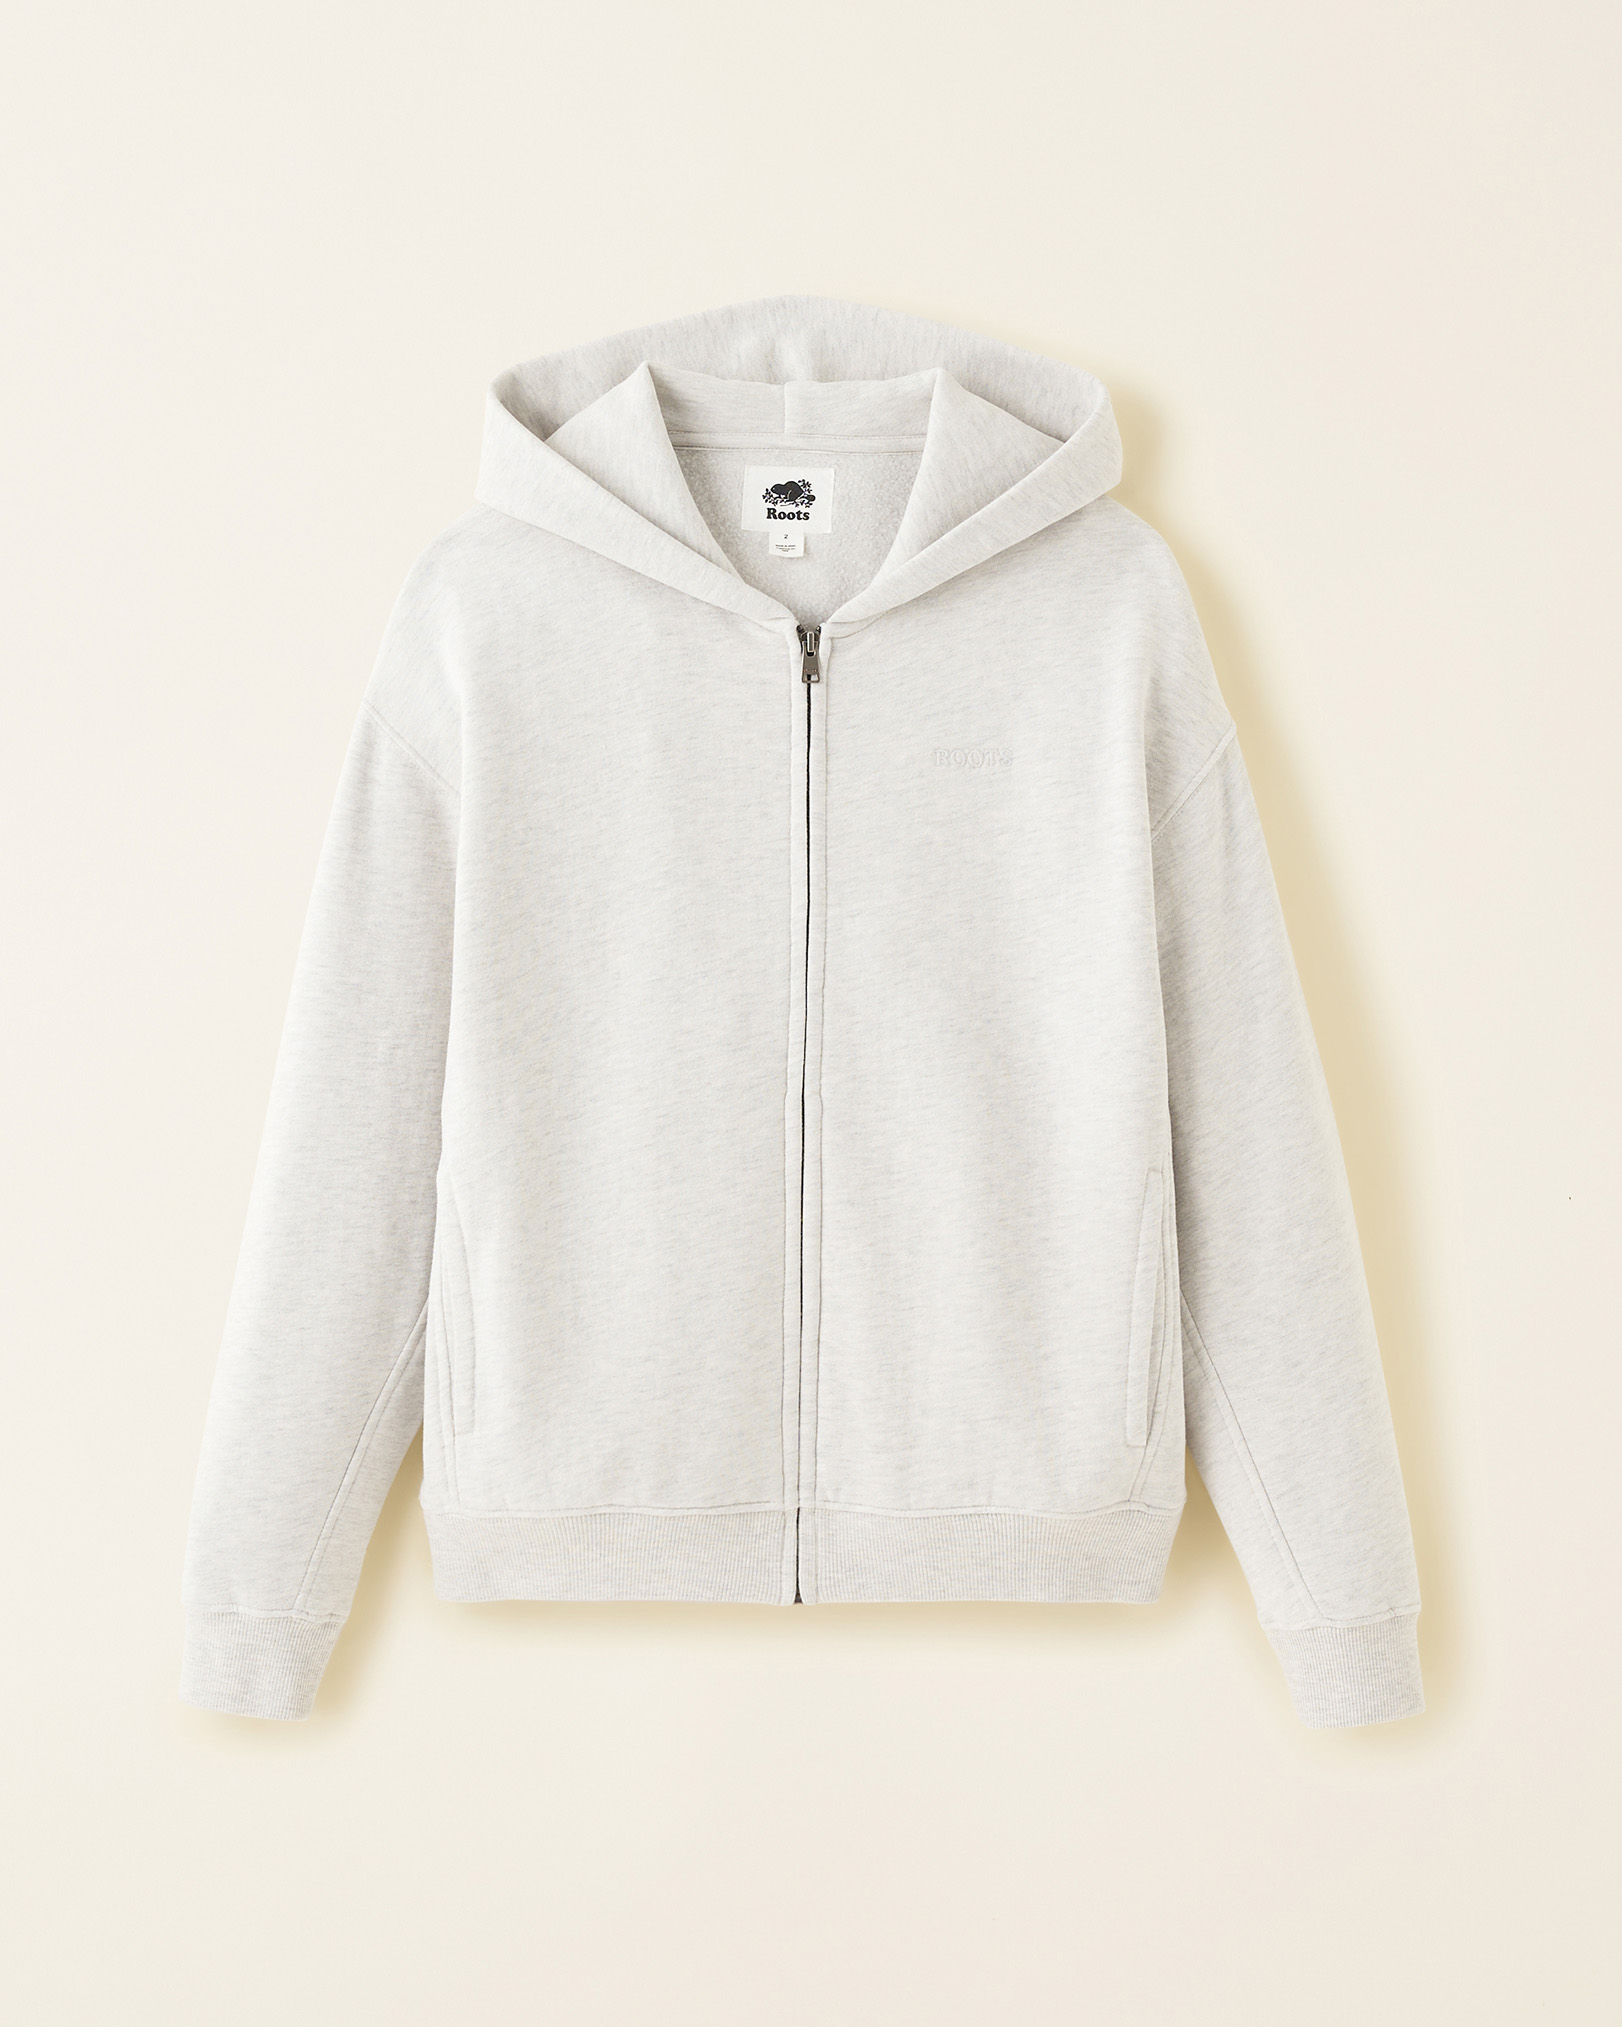 Roots One Zip Hoodie in White Mix